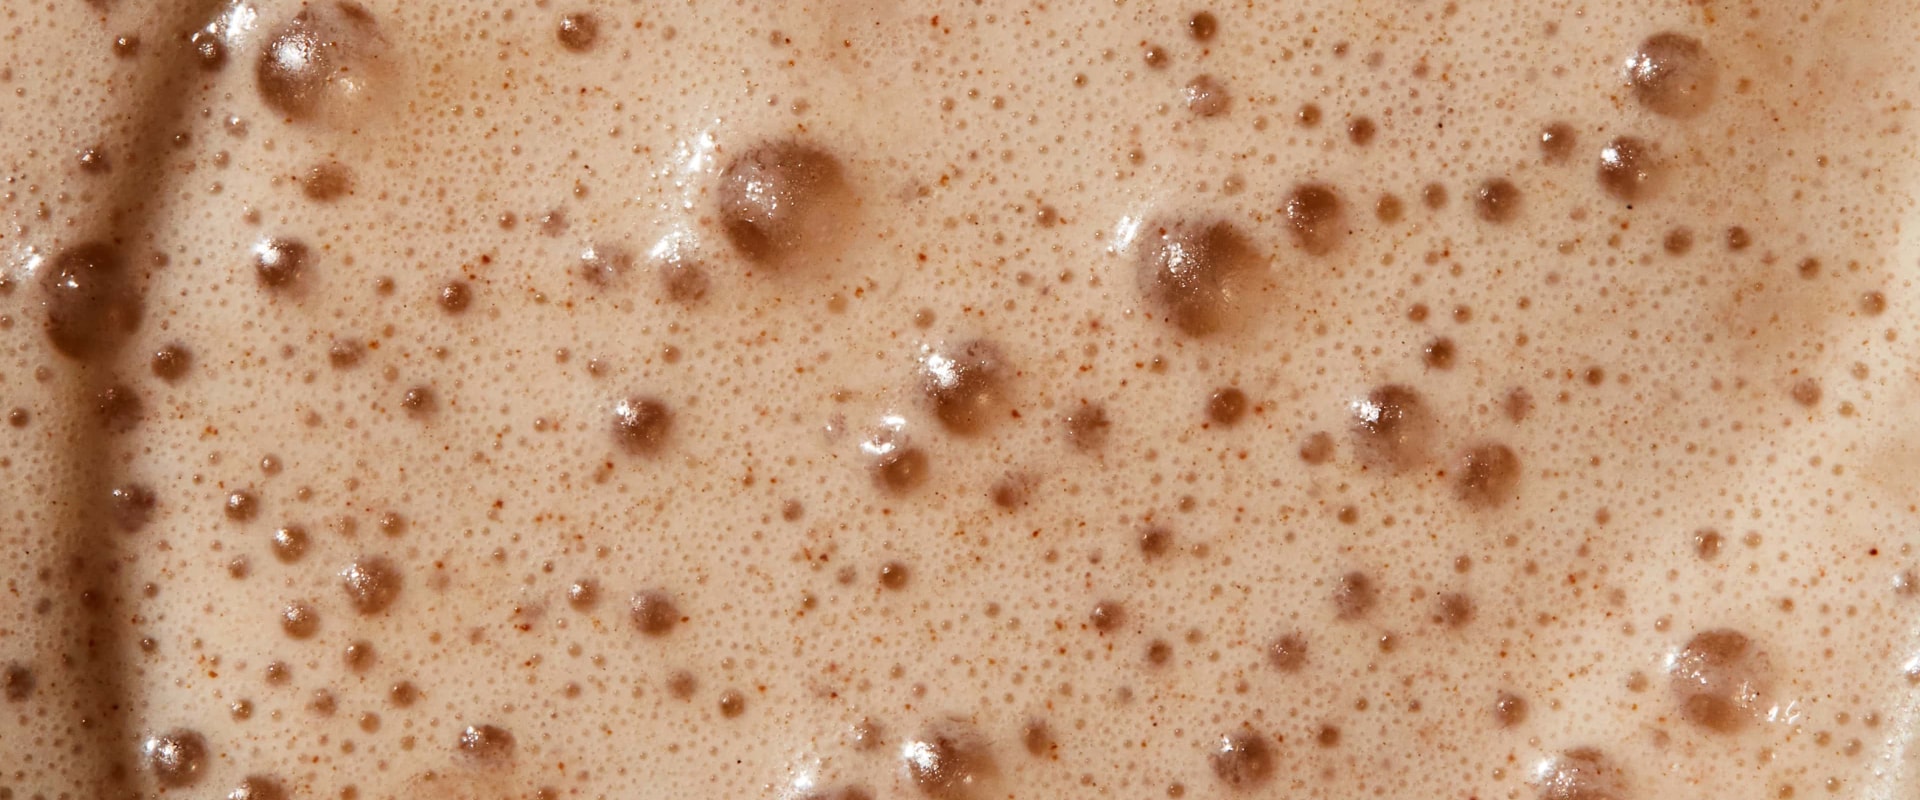 Is 3 whey protein shakes a day too much?